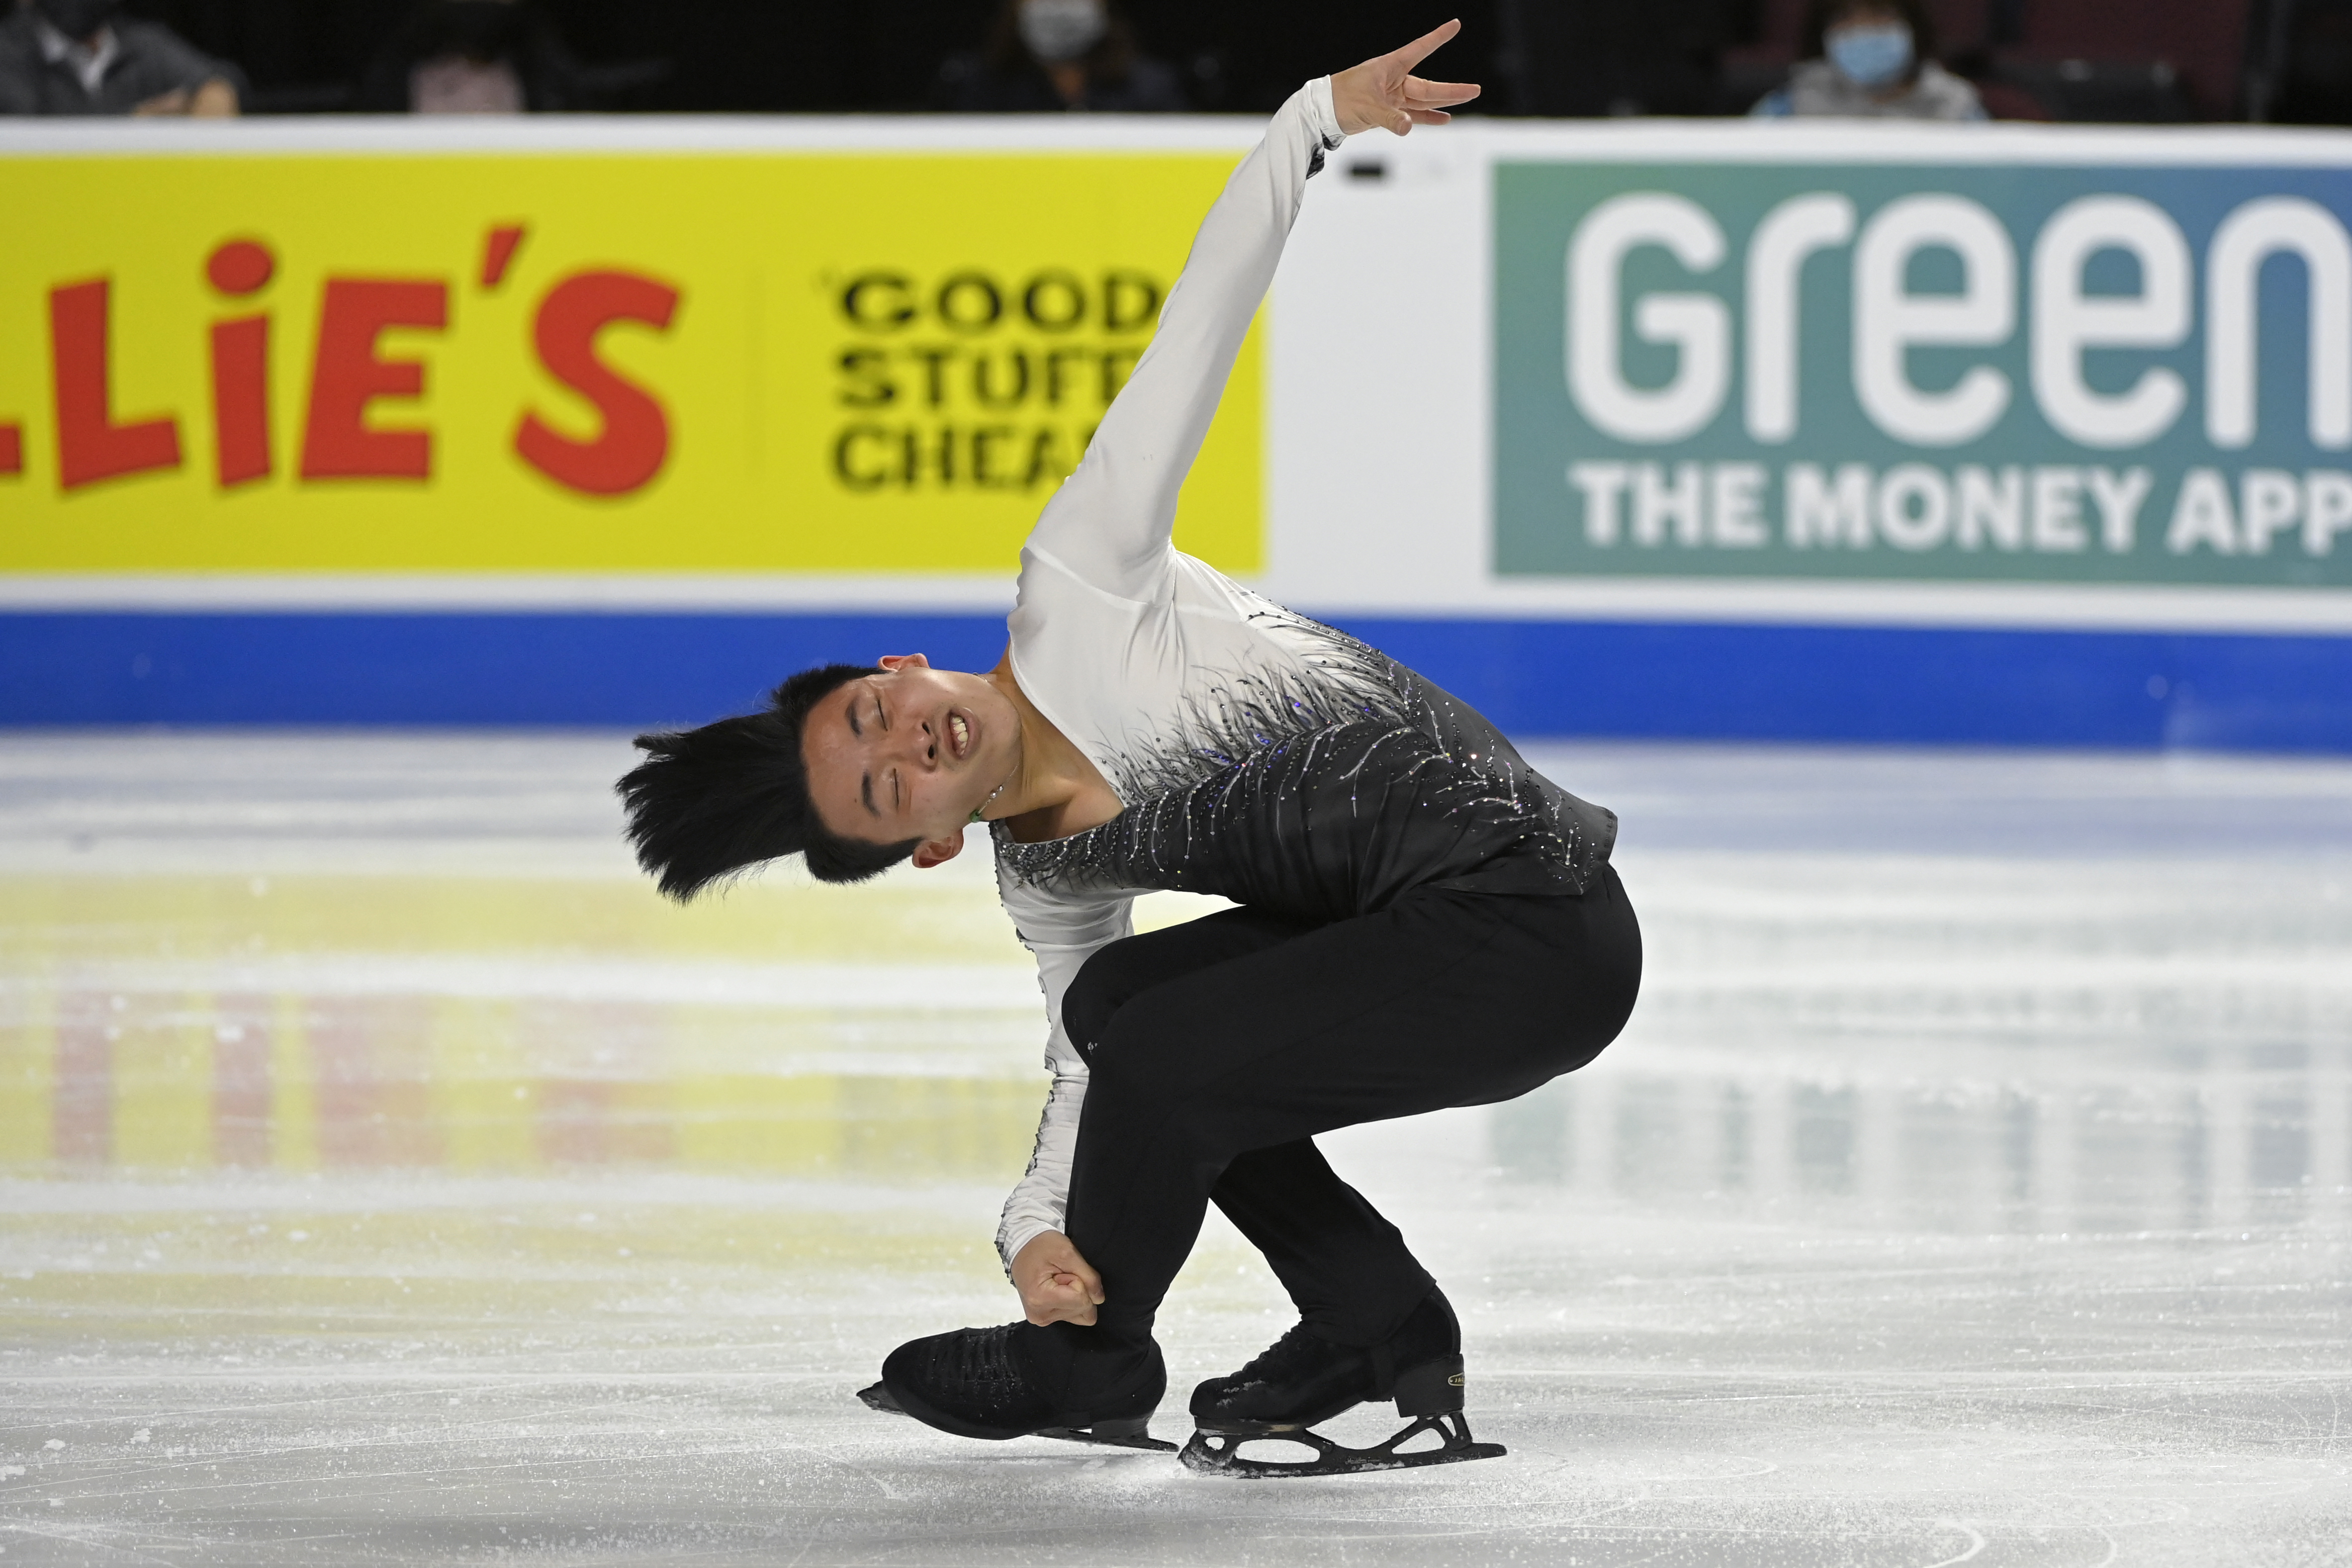 Boston skater Jimmy Ma an intriguing entry in this weeks US Figure Skating Championships